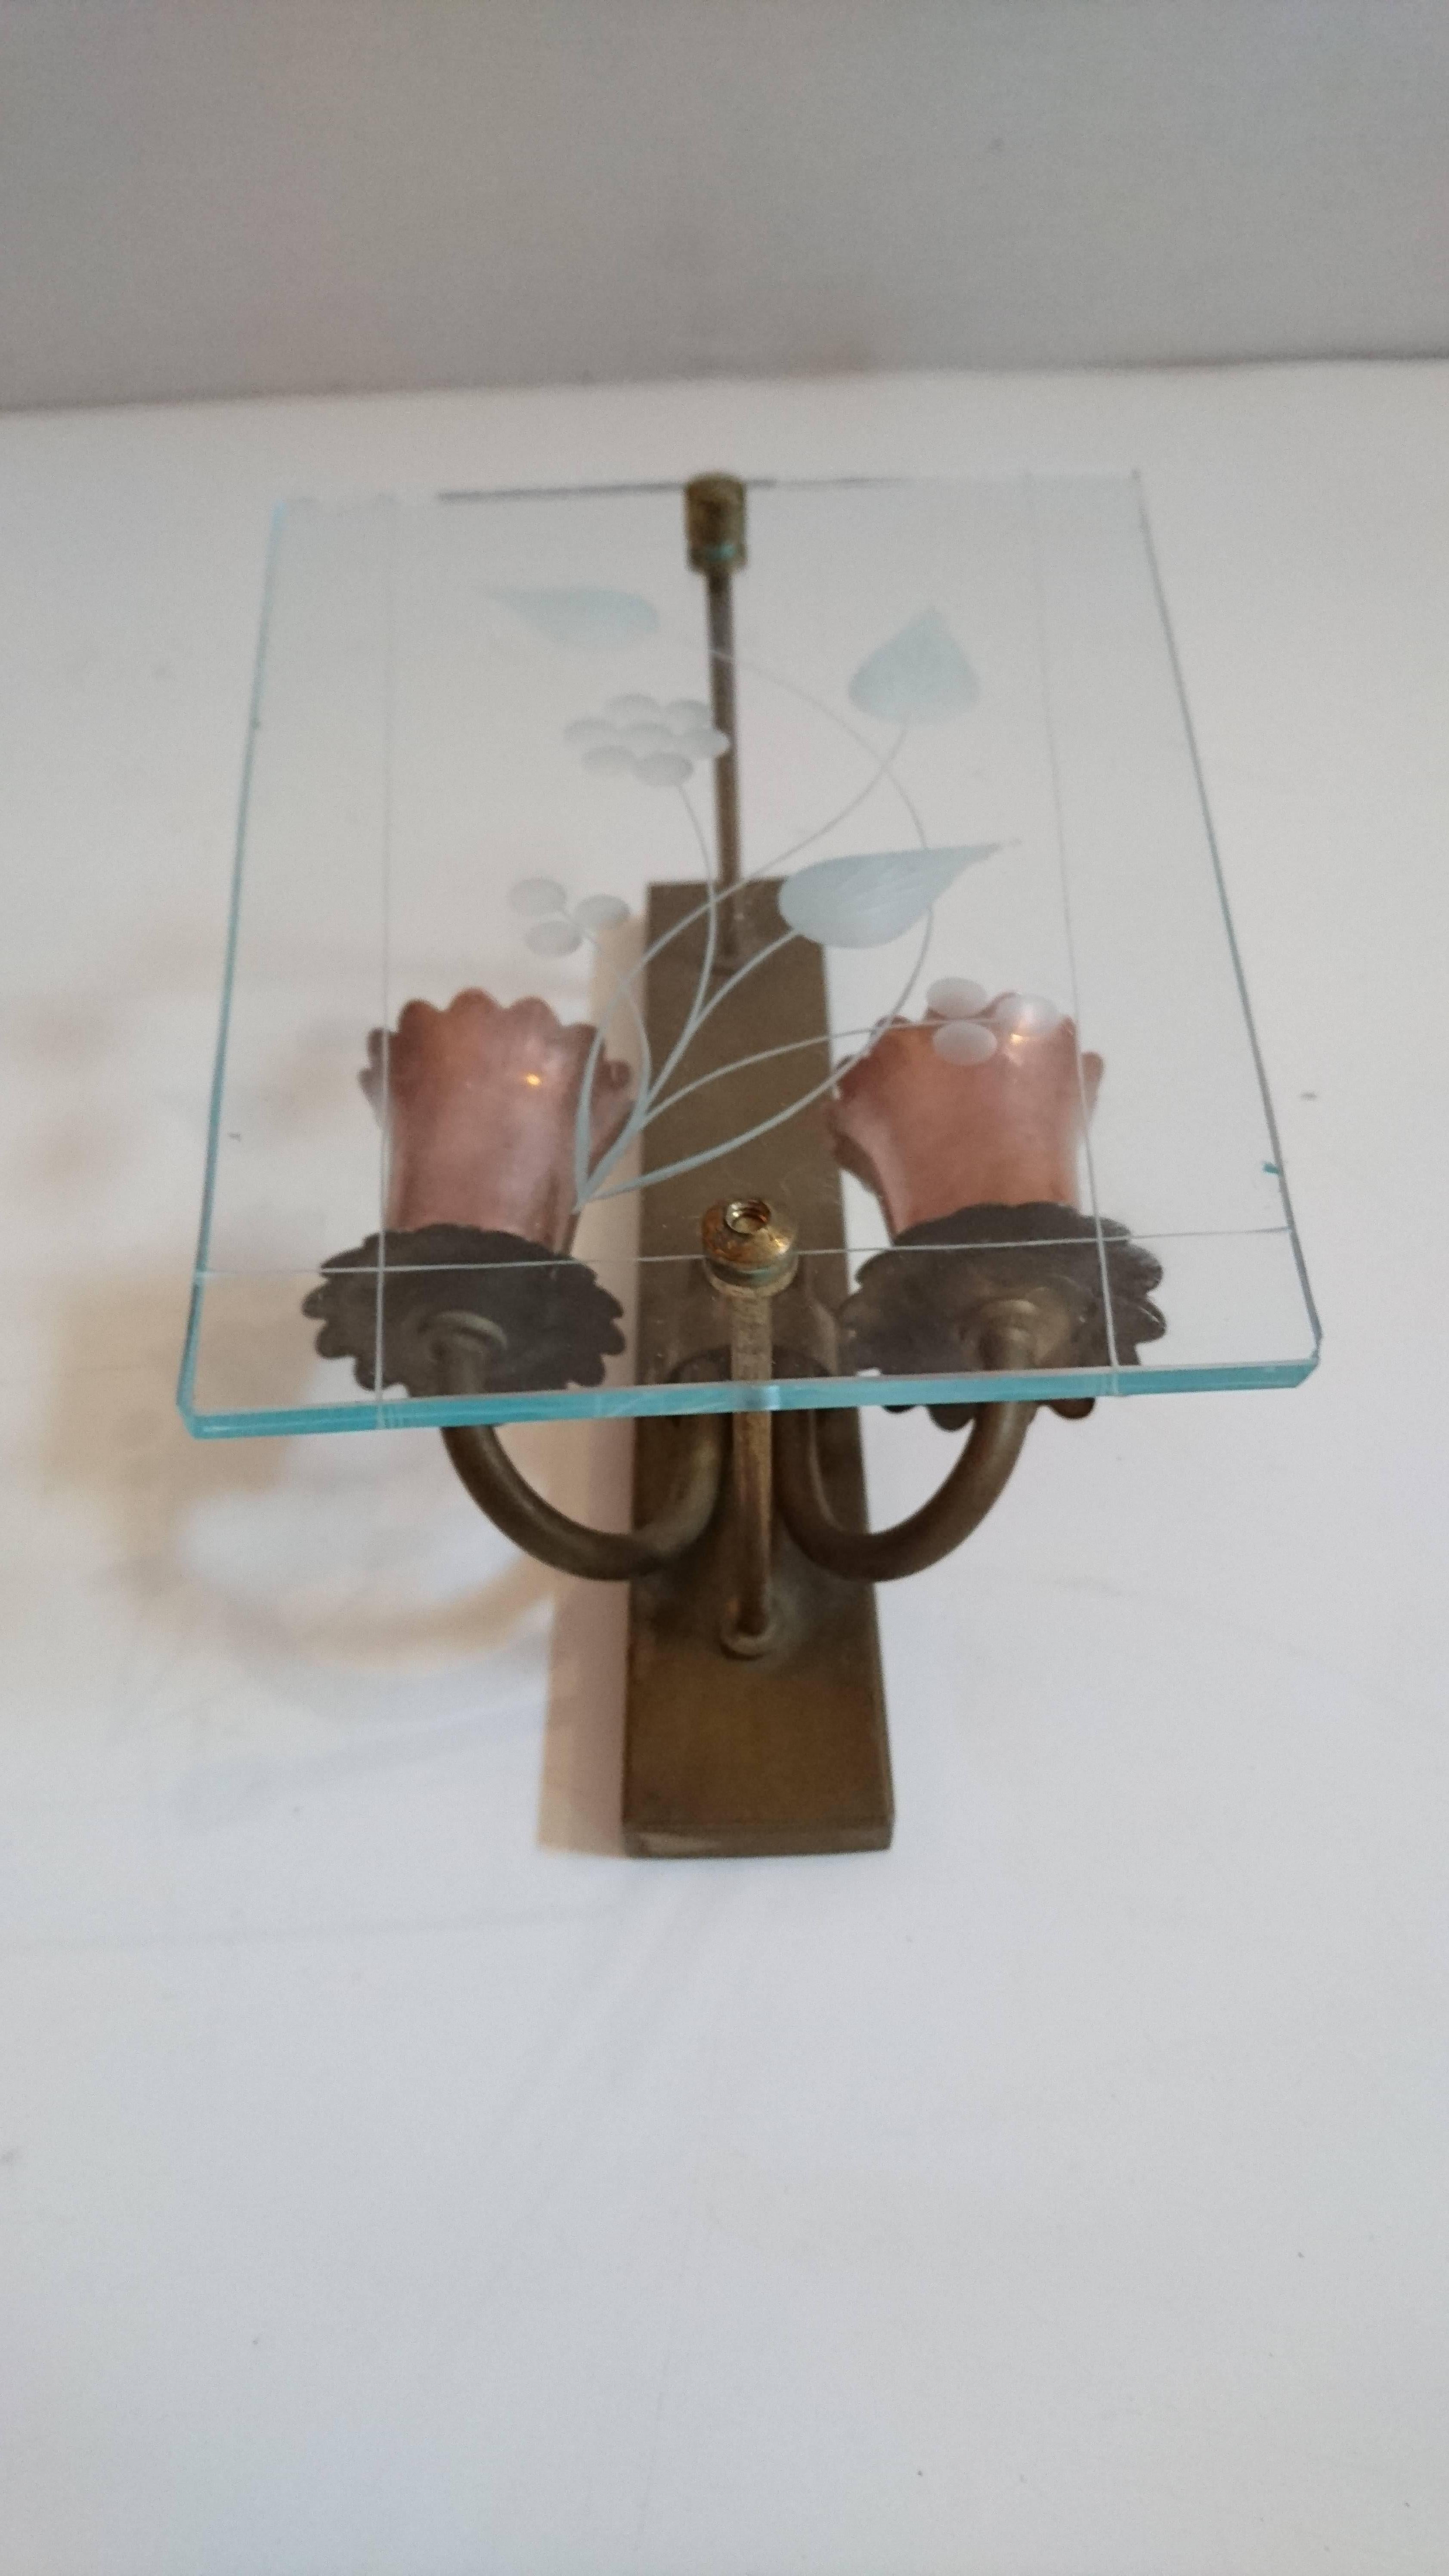 Italian Pair of Midcentury Glass and Copper Wall Sconces, Made in Italy For Sale